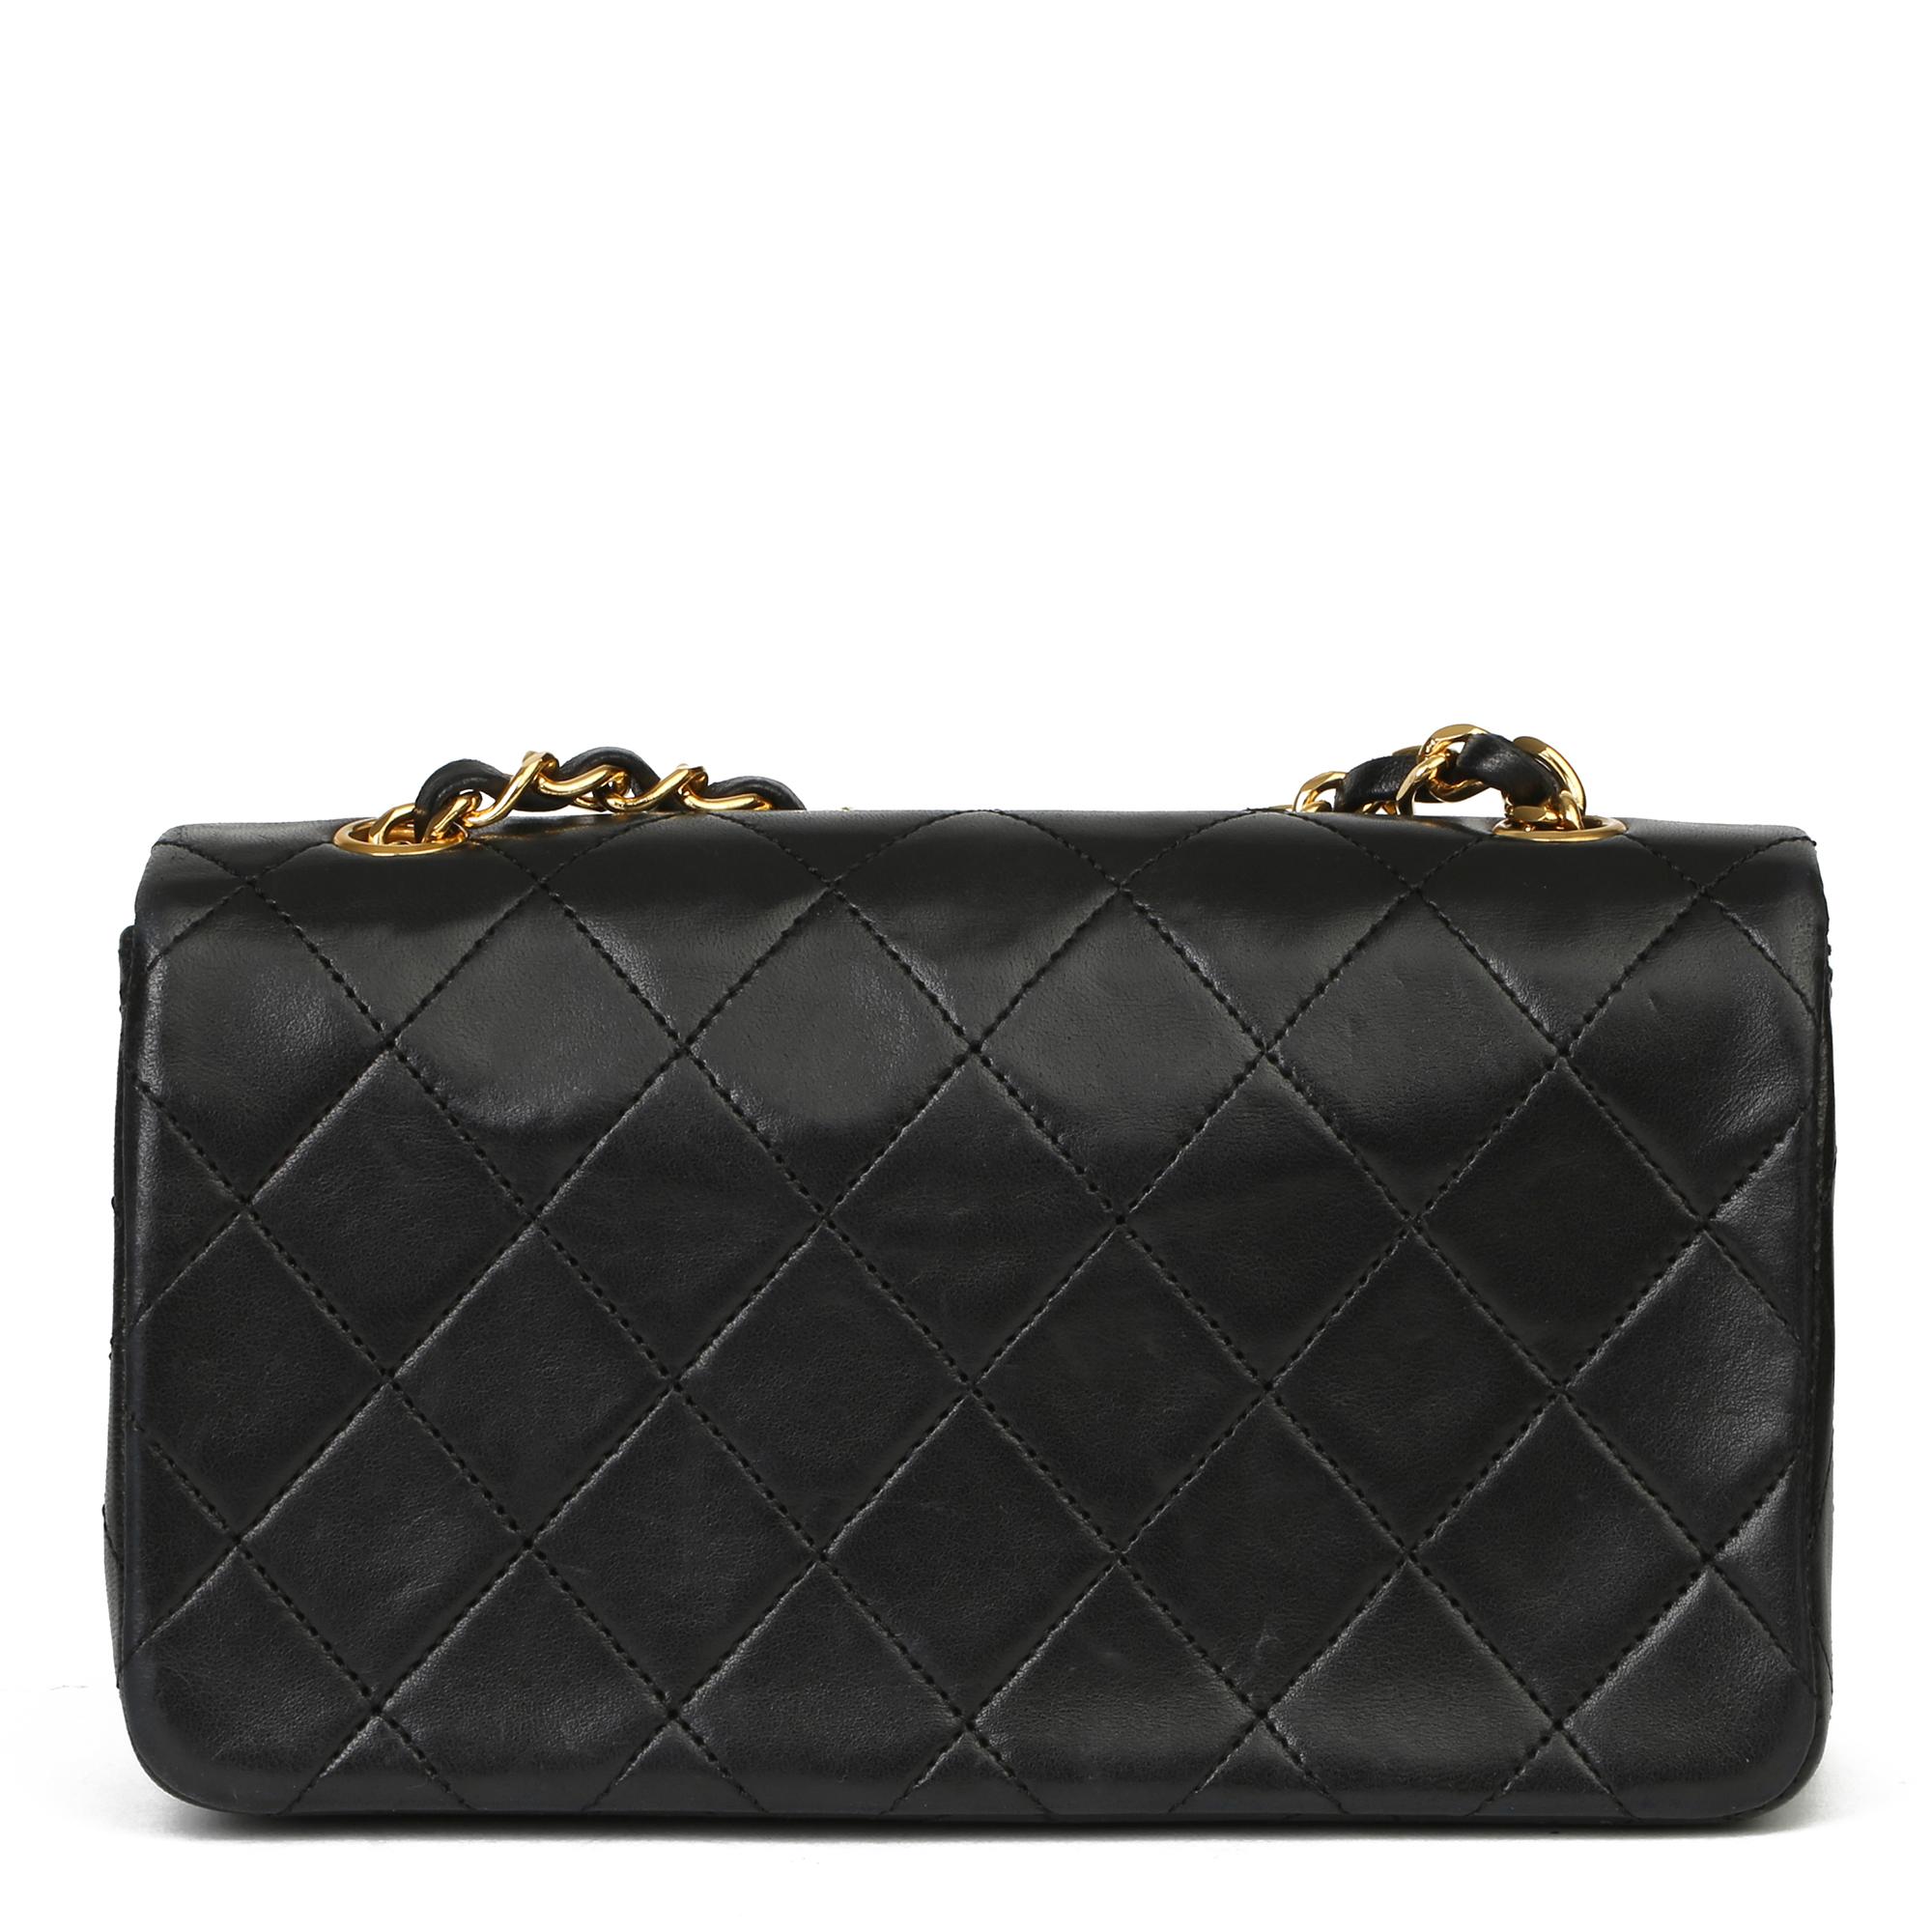 Chanel Black Quilted Lambskin Vintage Mini Flap Bag 1